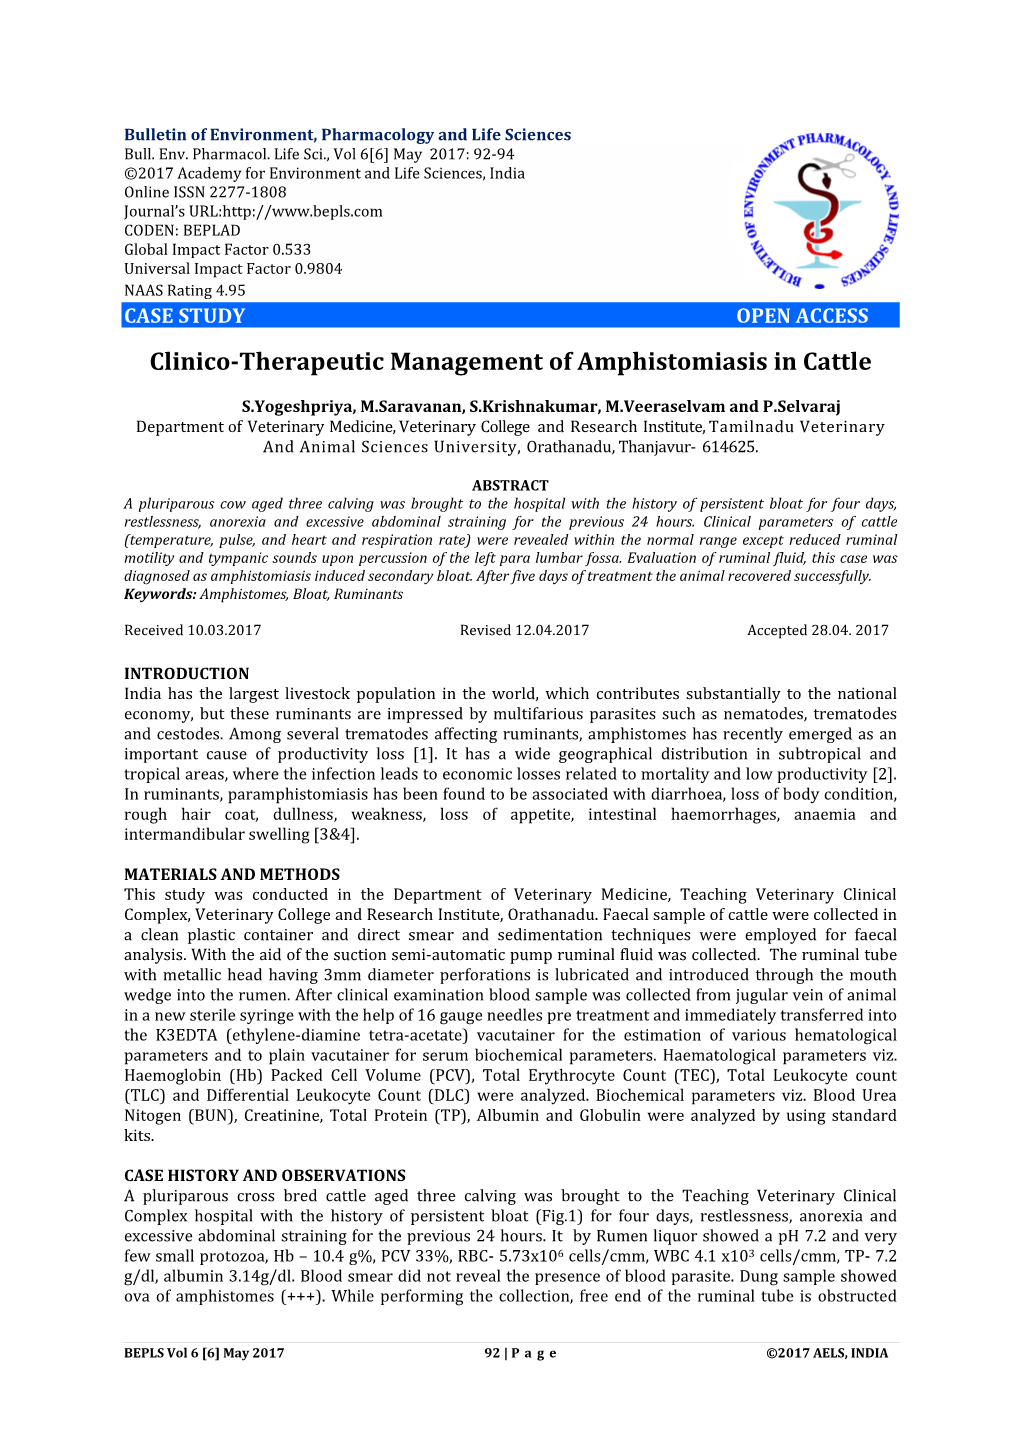 Clinico-Therapeutic Management of Amphistomiasis in Cattle